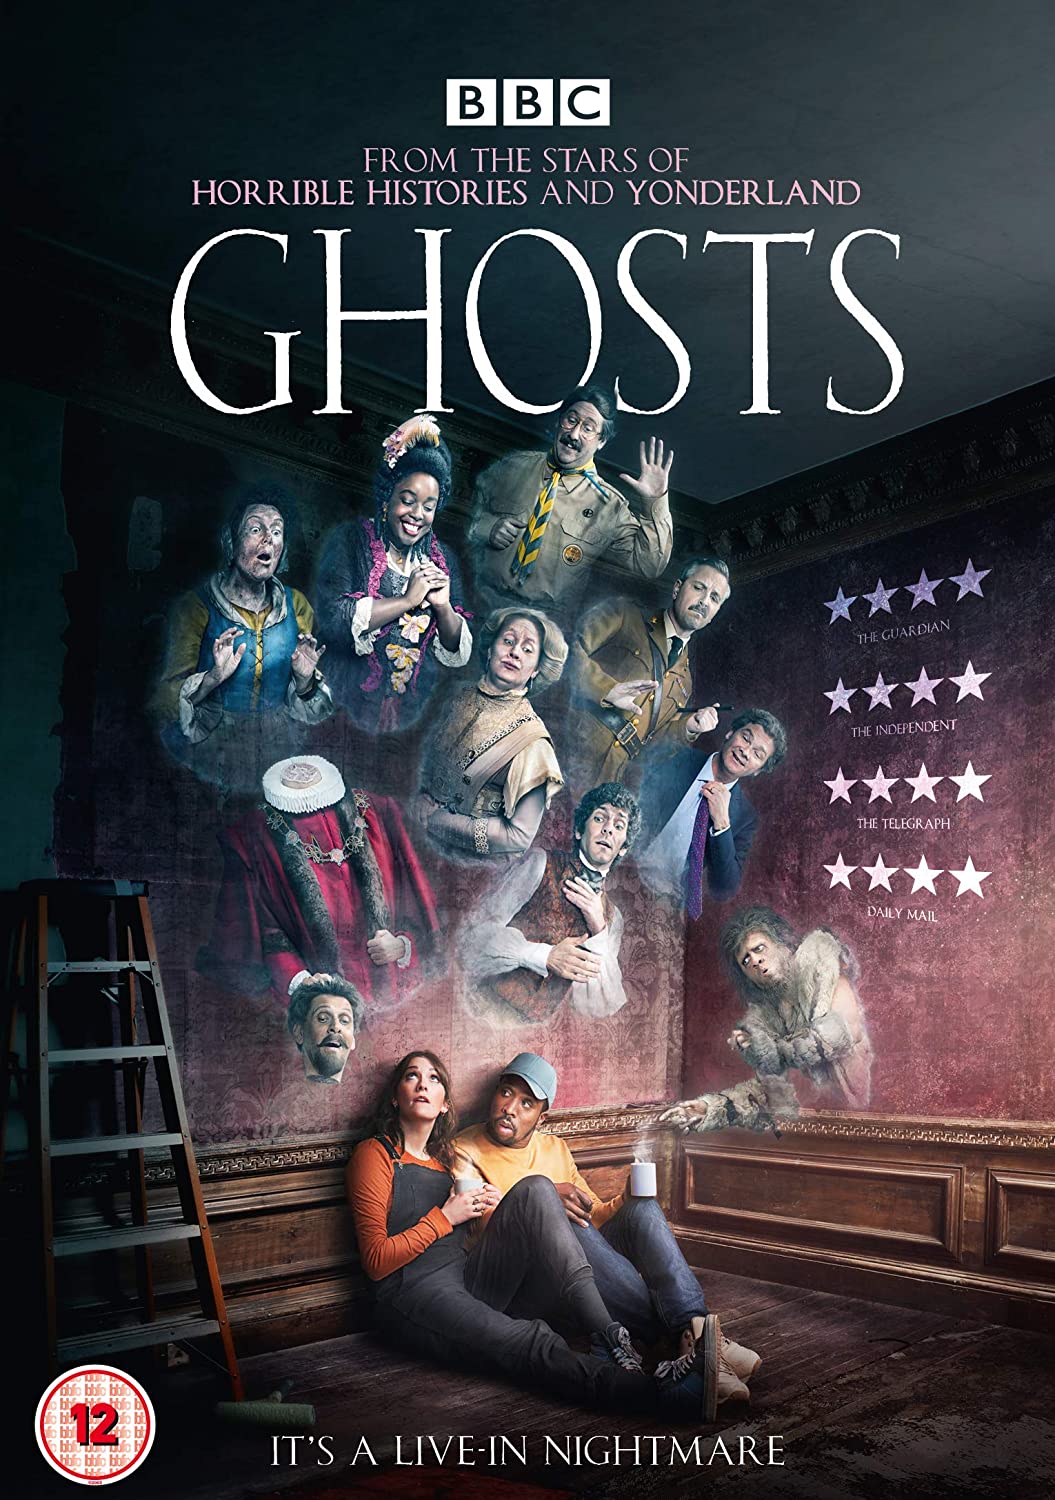 Ghosts 2019 S02 English BBC Complete TV Series 720p HDRip 1.2GB Download